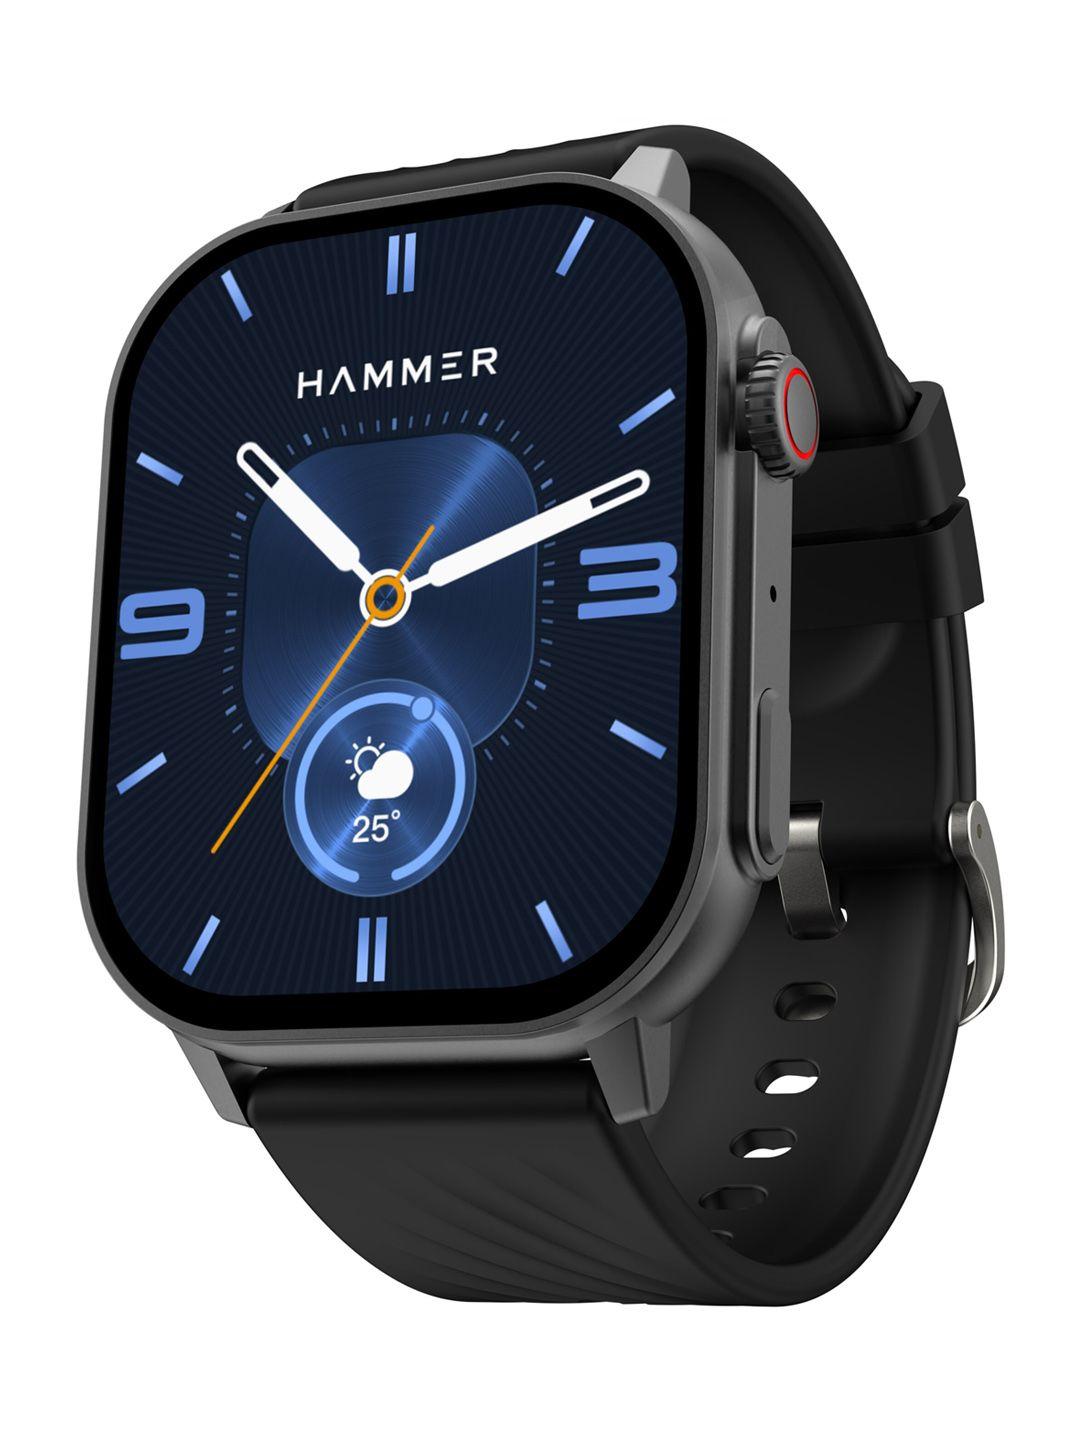 HAMMER Power Black Arctic 2.04 Inch SUPER AMOLED Smart Watch with BT Calling